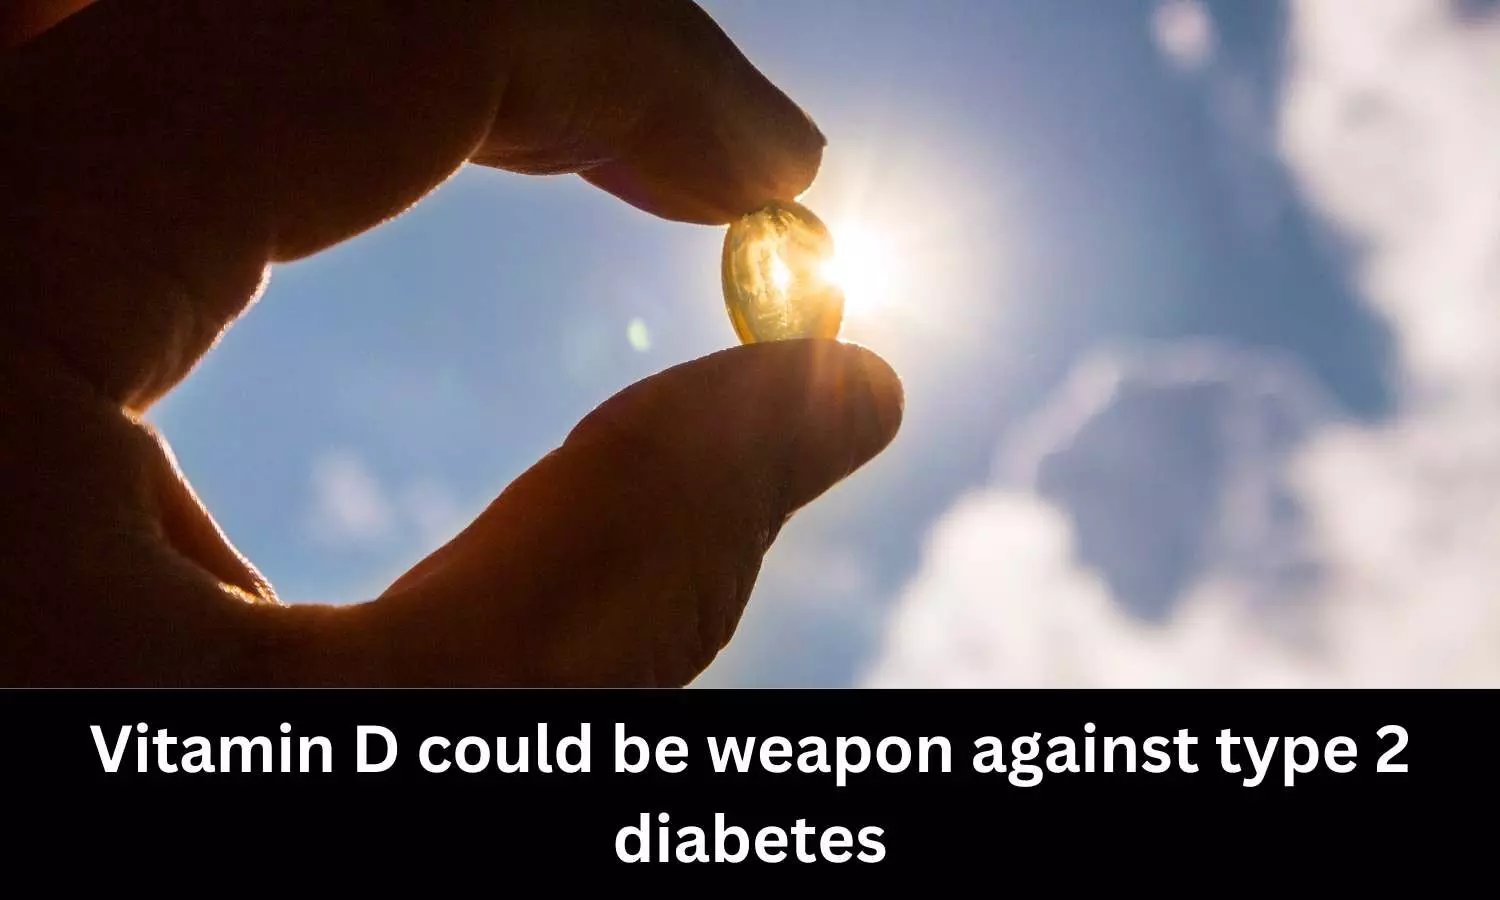 Vitamin D could be weapon against type 2 diabetes